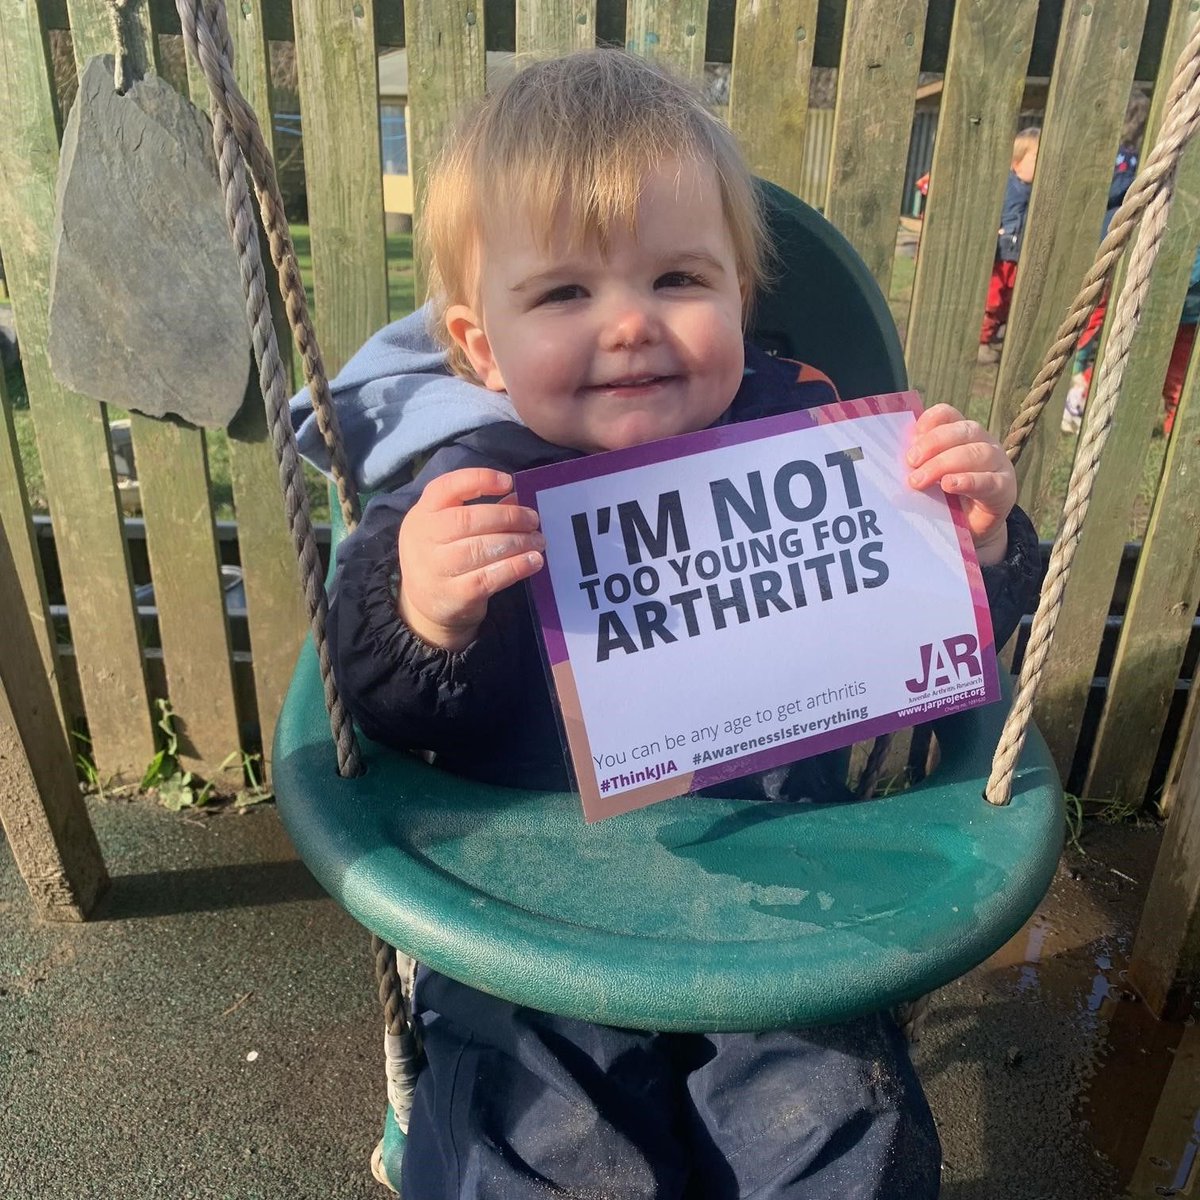 One of the many misconceptions that those with #JIA face is the incorrect assumption that #arthritis only affects the elderly. 
Bonnie is just 17 months old and has arthritis. 
Thank you for raising awareness Bonnie. Please share to raise awareness that #ChildrenGetArthritisToo